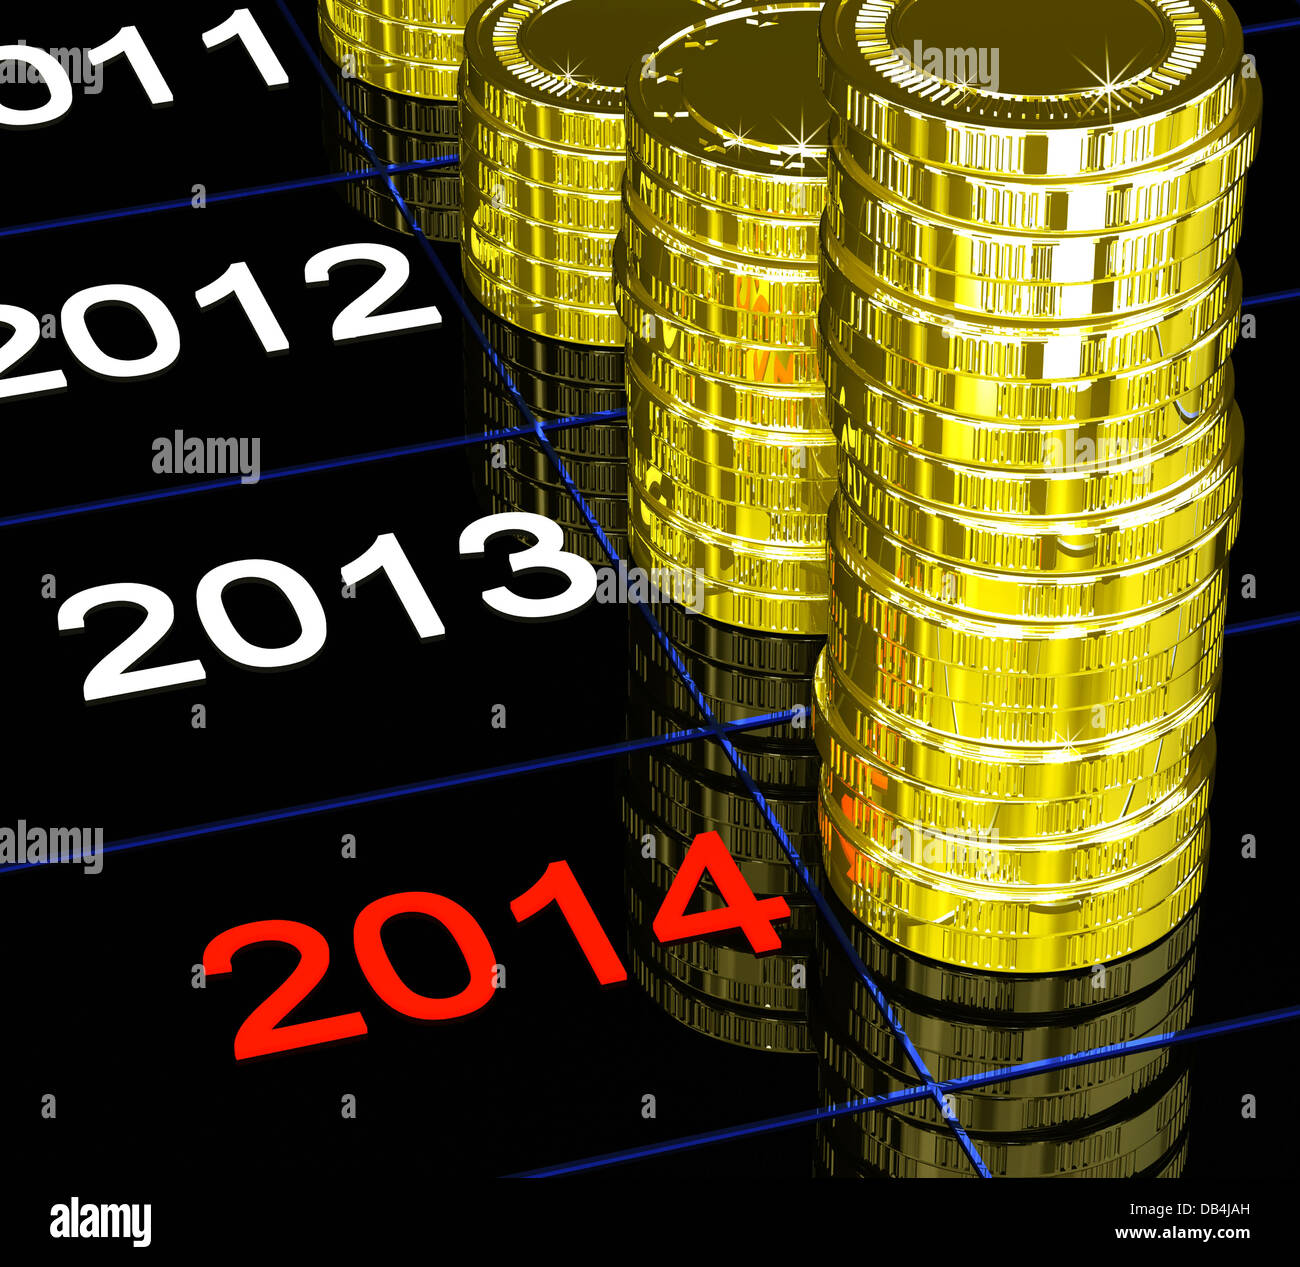 Coins On 2014 Showing Upcoming Finances Stock Photo